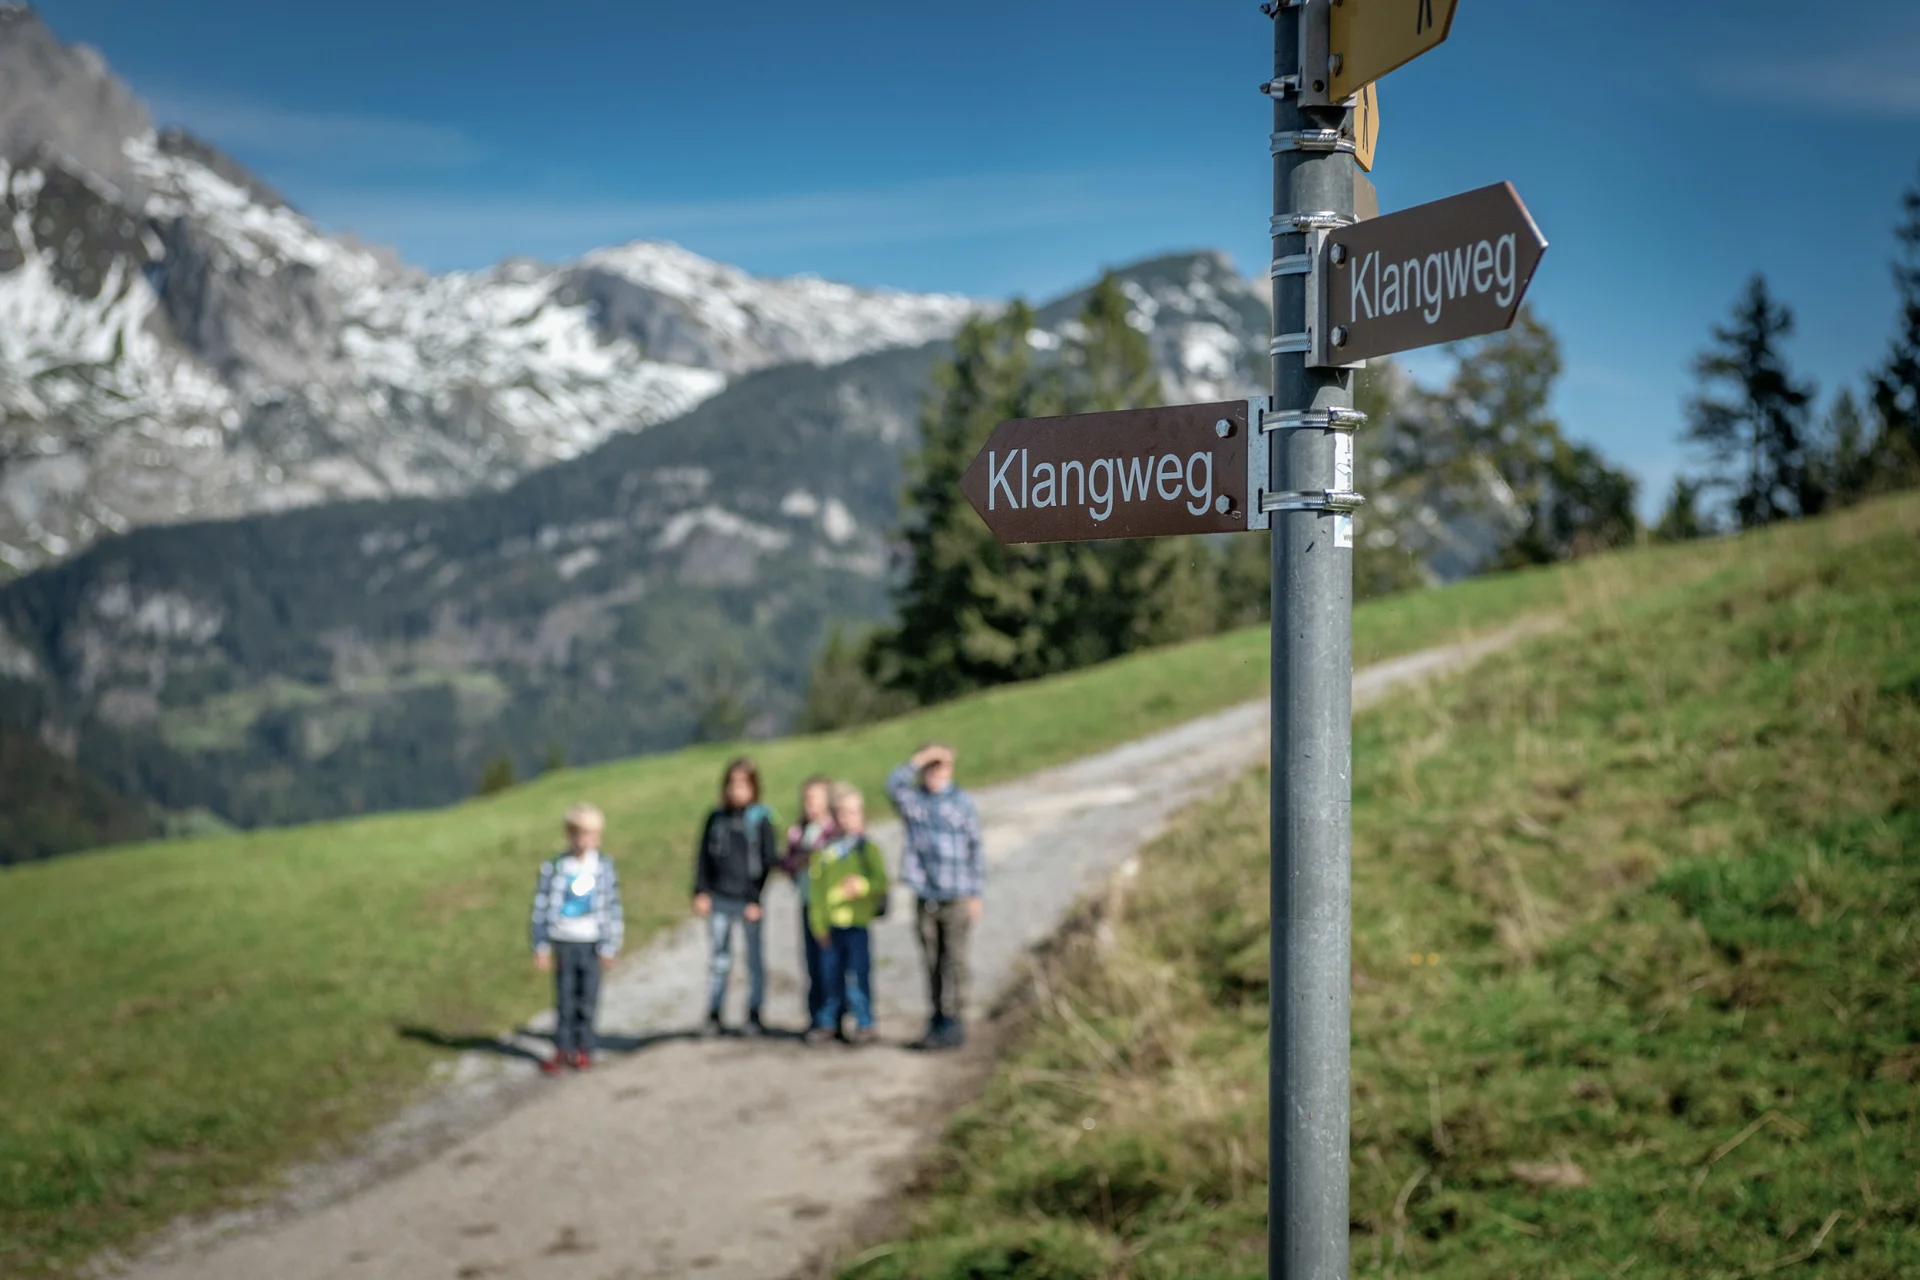 A group of children on the “Sound Trail” (Klangweg) in Toggenburg